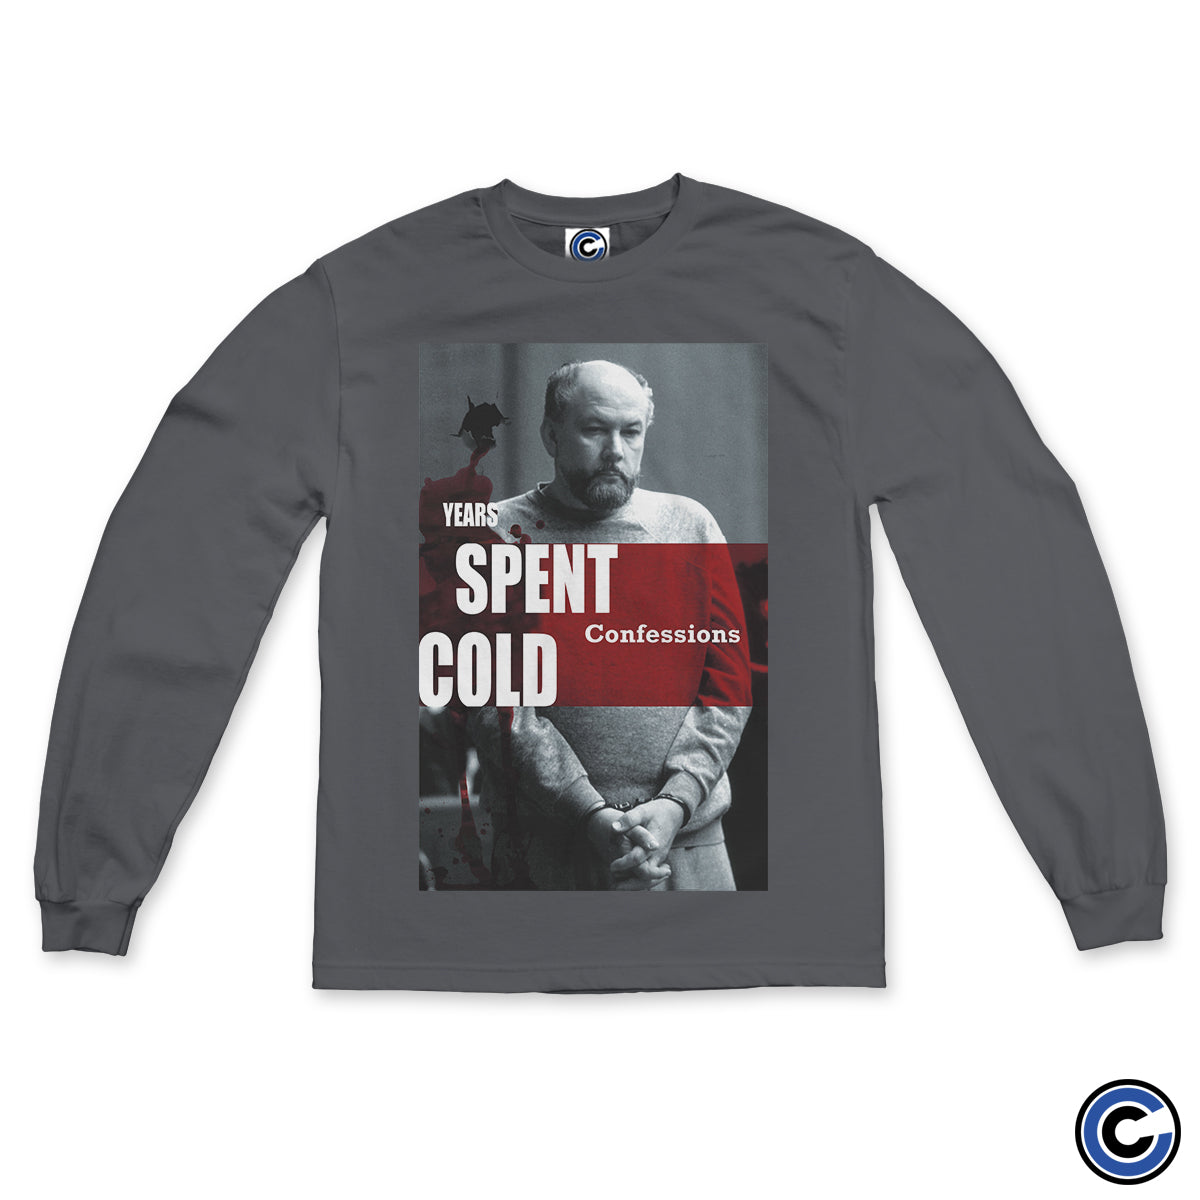 Years Spent Cold "Confessions" Long Sleeve